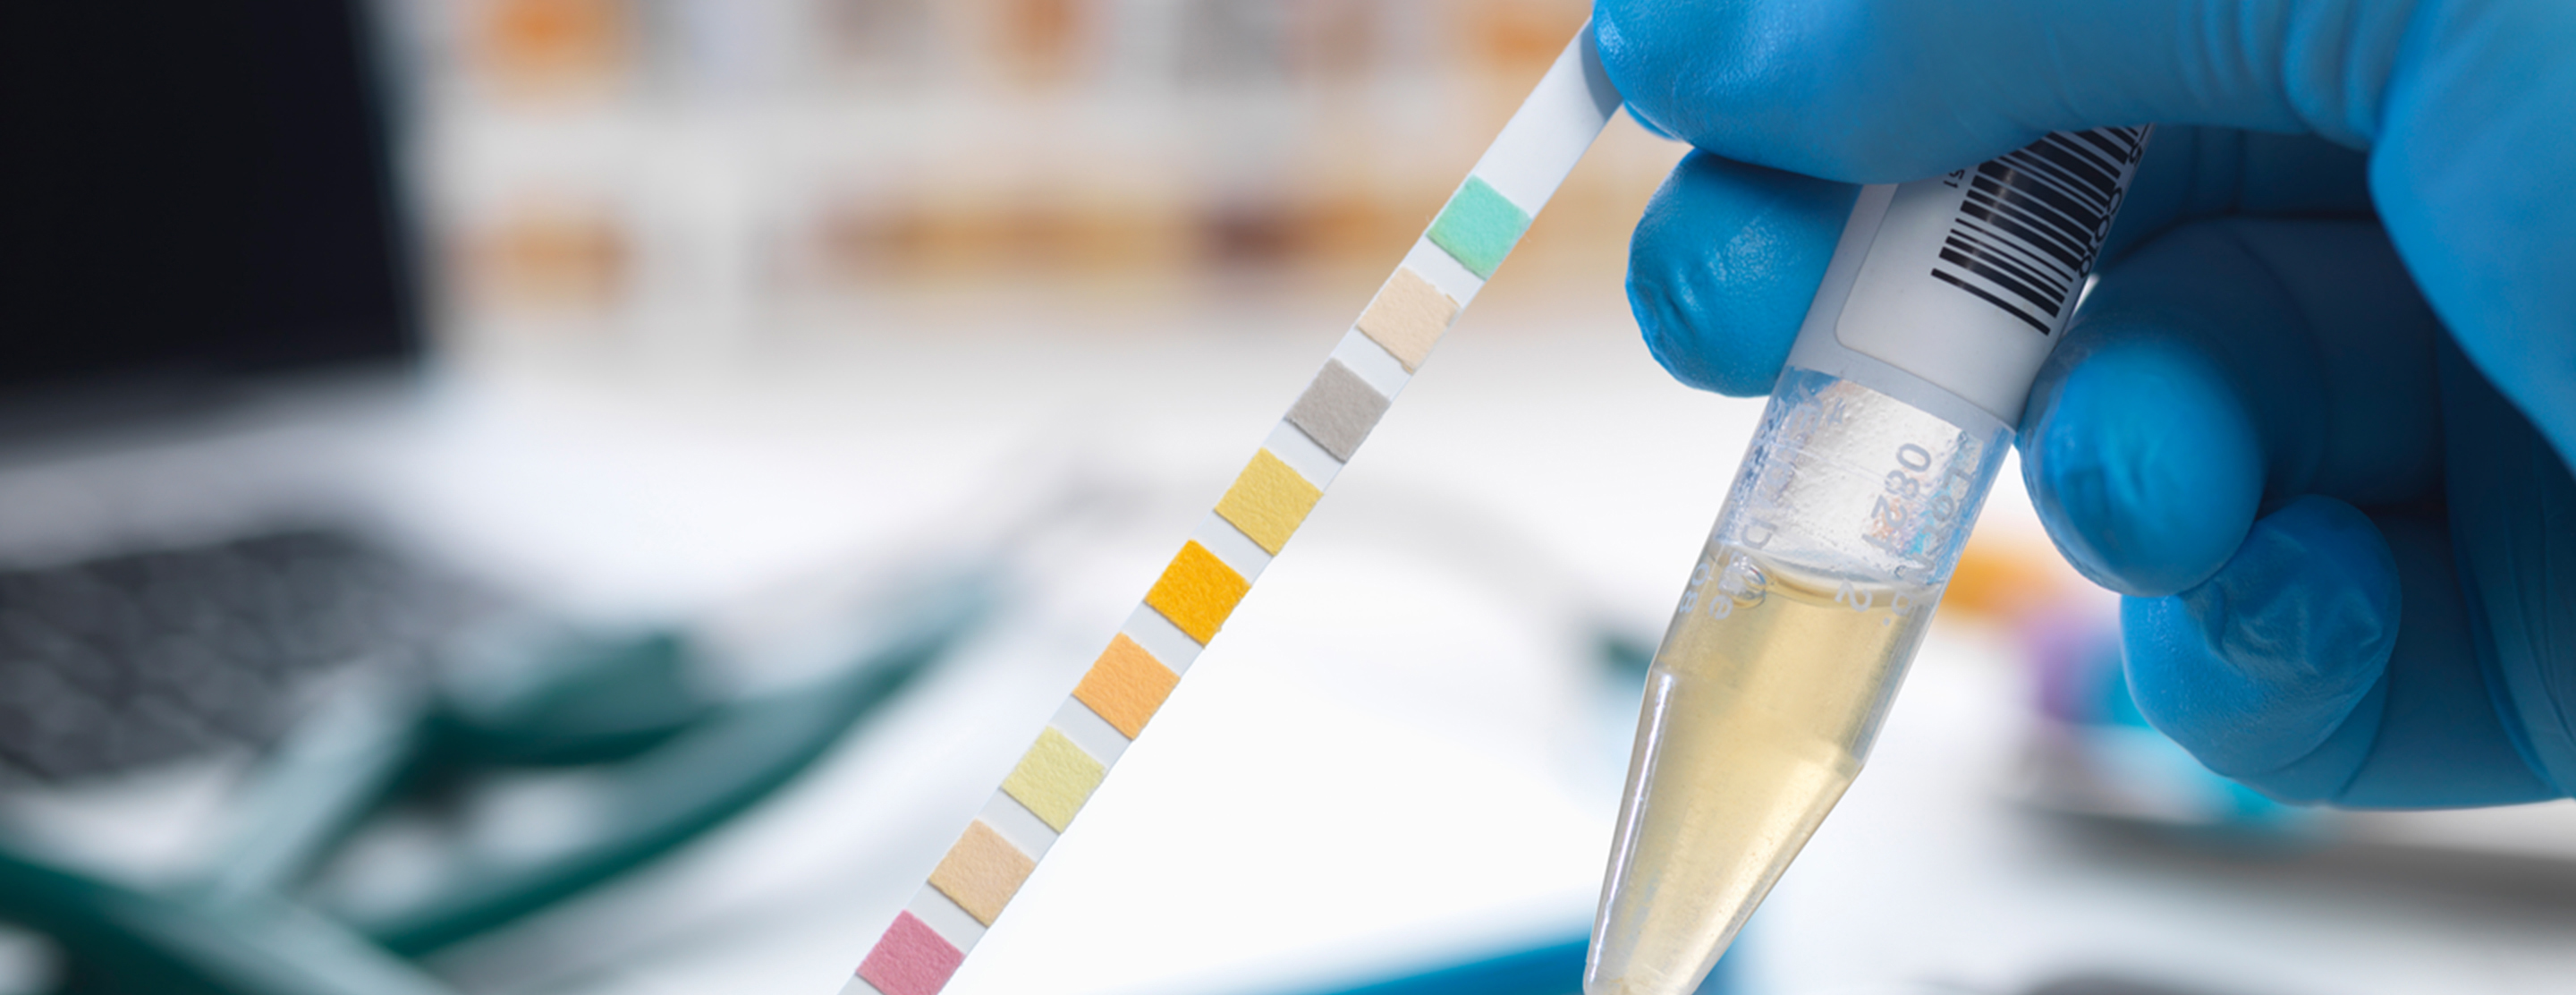 Urine Tests During Pregnancy: Why Urine Analysis Is So Important